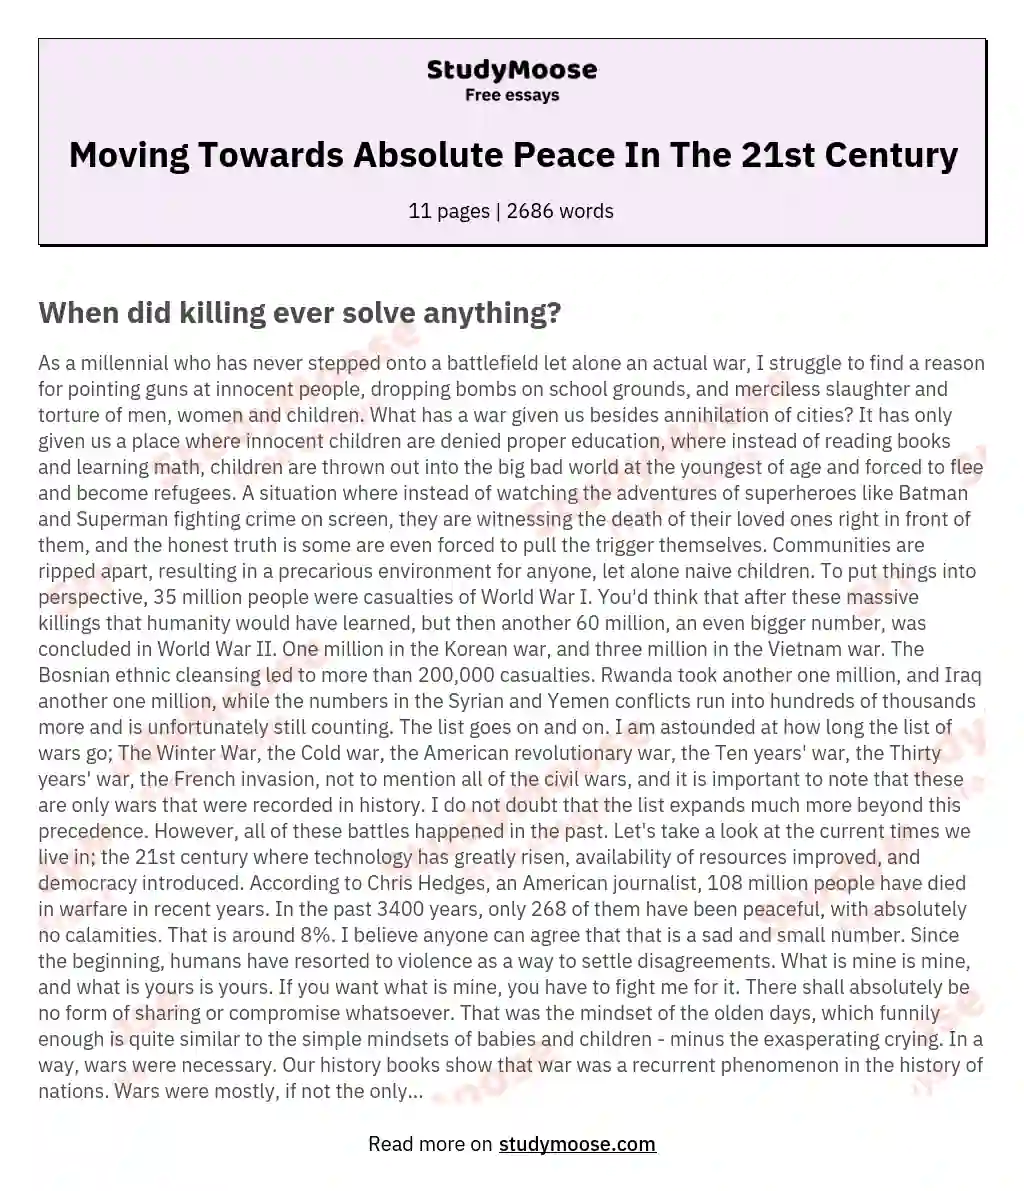 Moving Towards Absolute Peace In The 21st Century essay